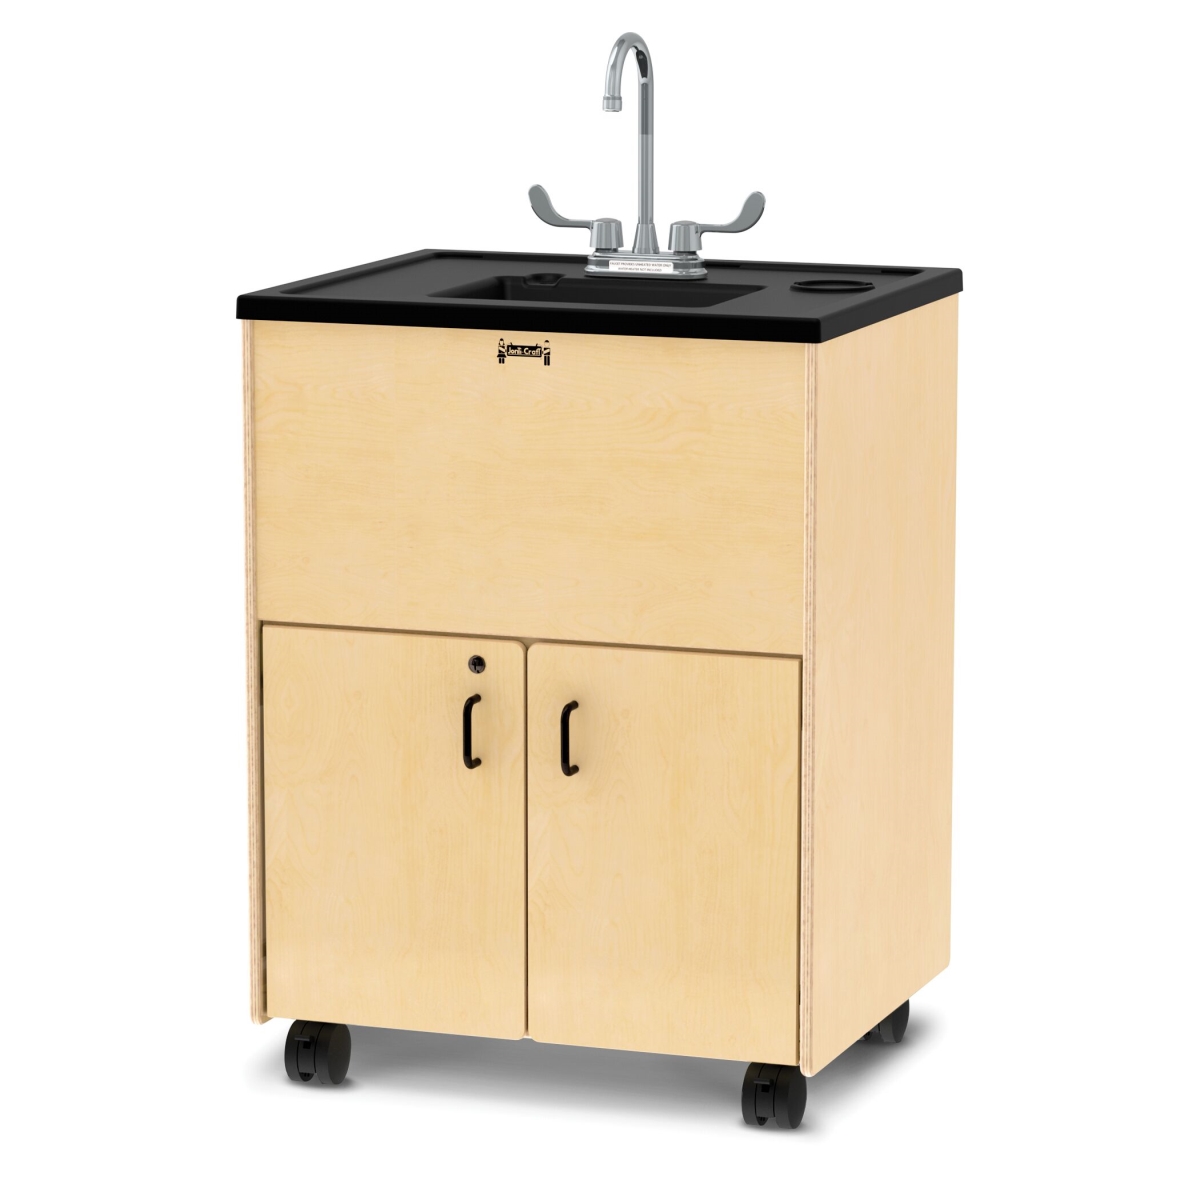 1382jc 38 In. Counter Clean Hands Helper Without Heater, Plastic Sink - 49.5 X 28.5 X 23.5 In.